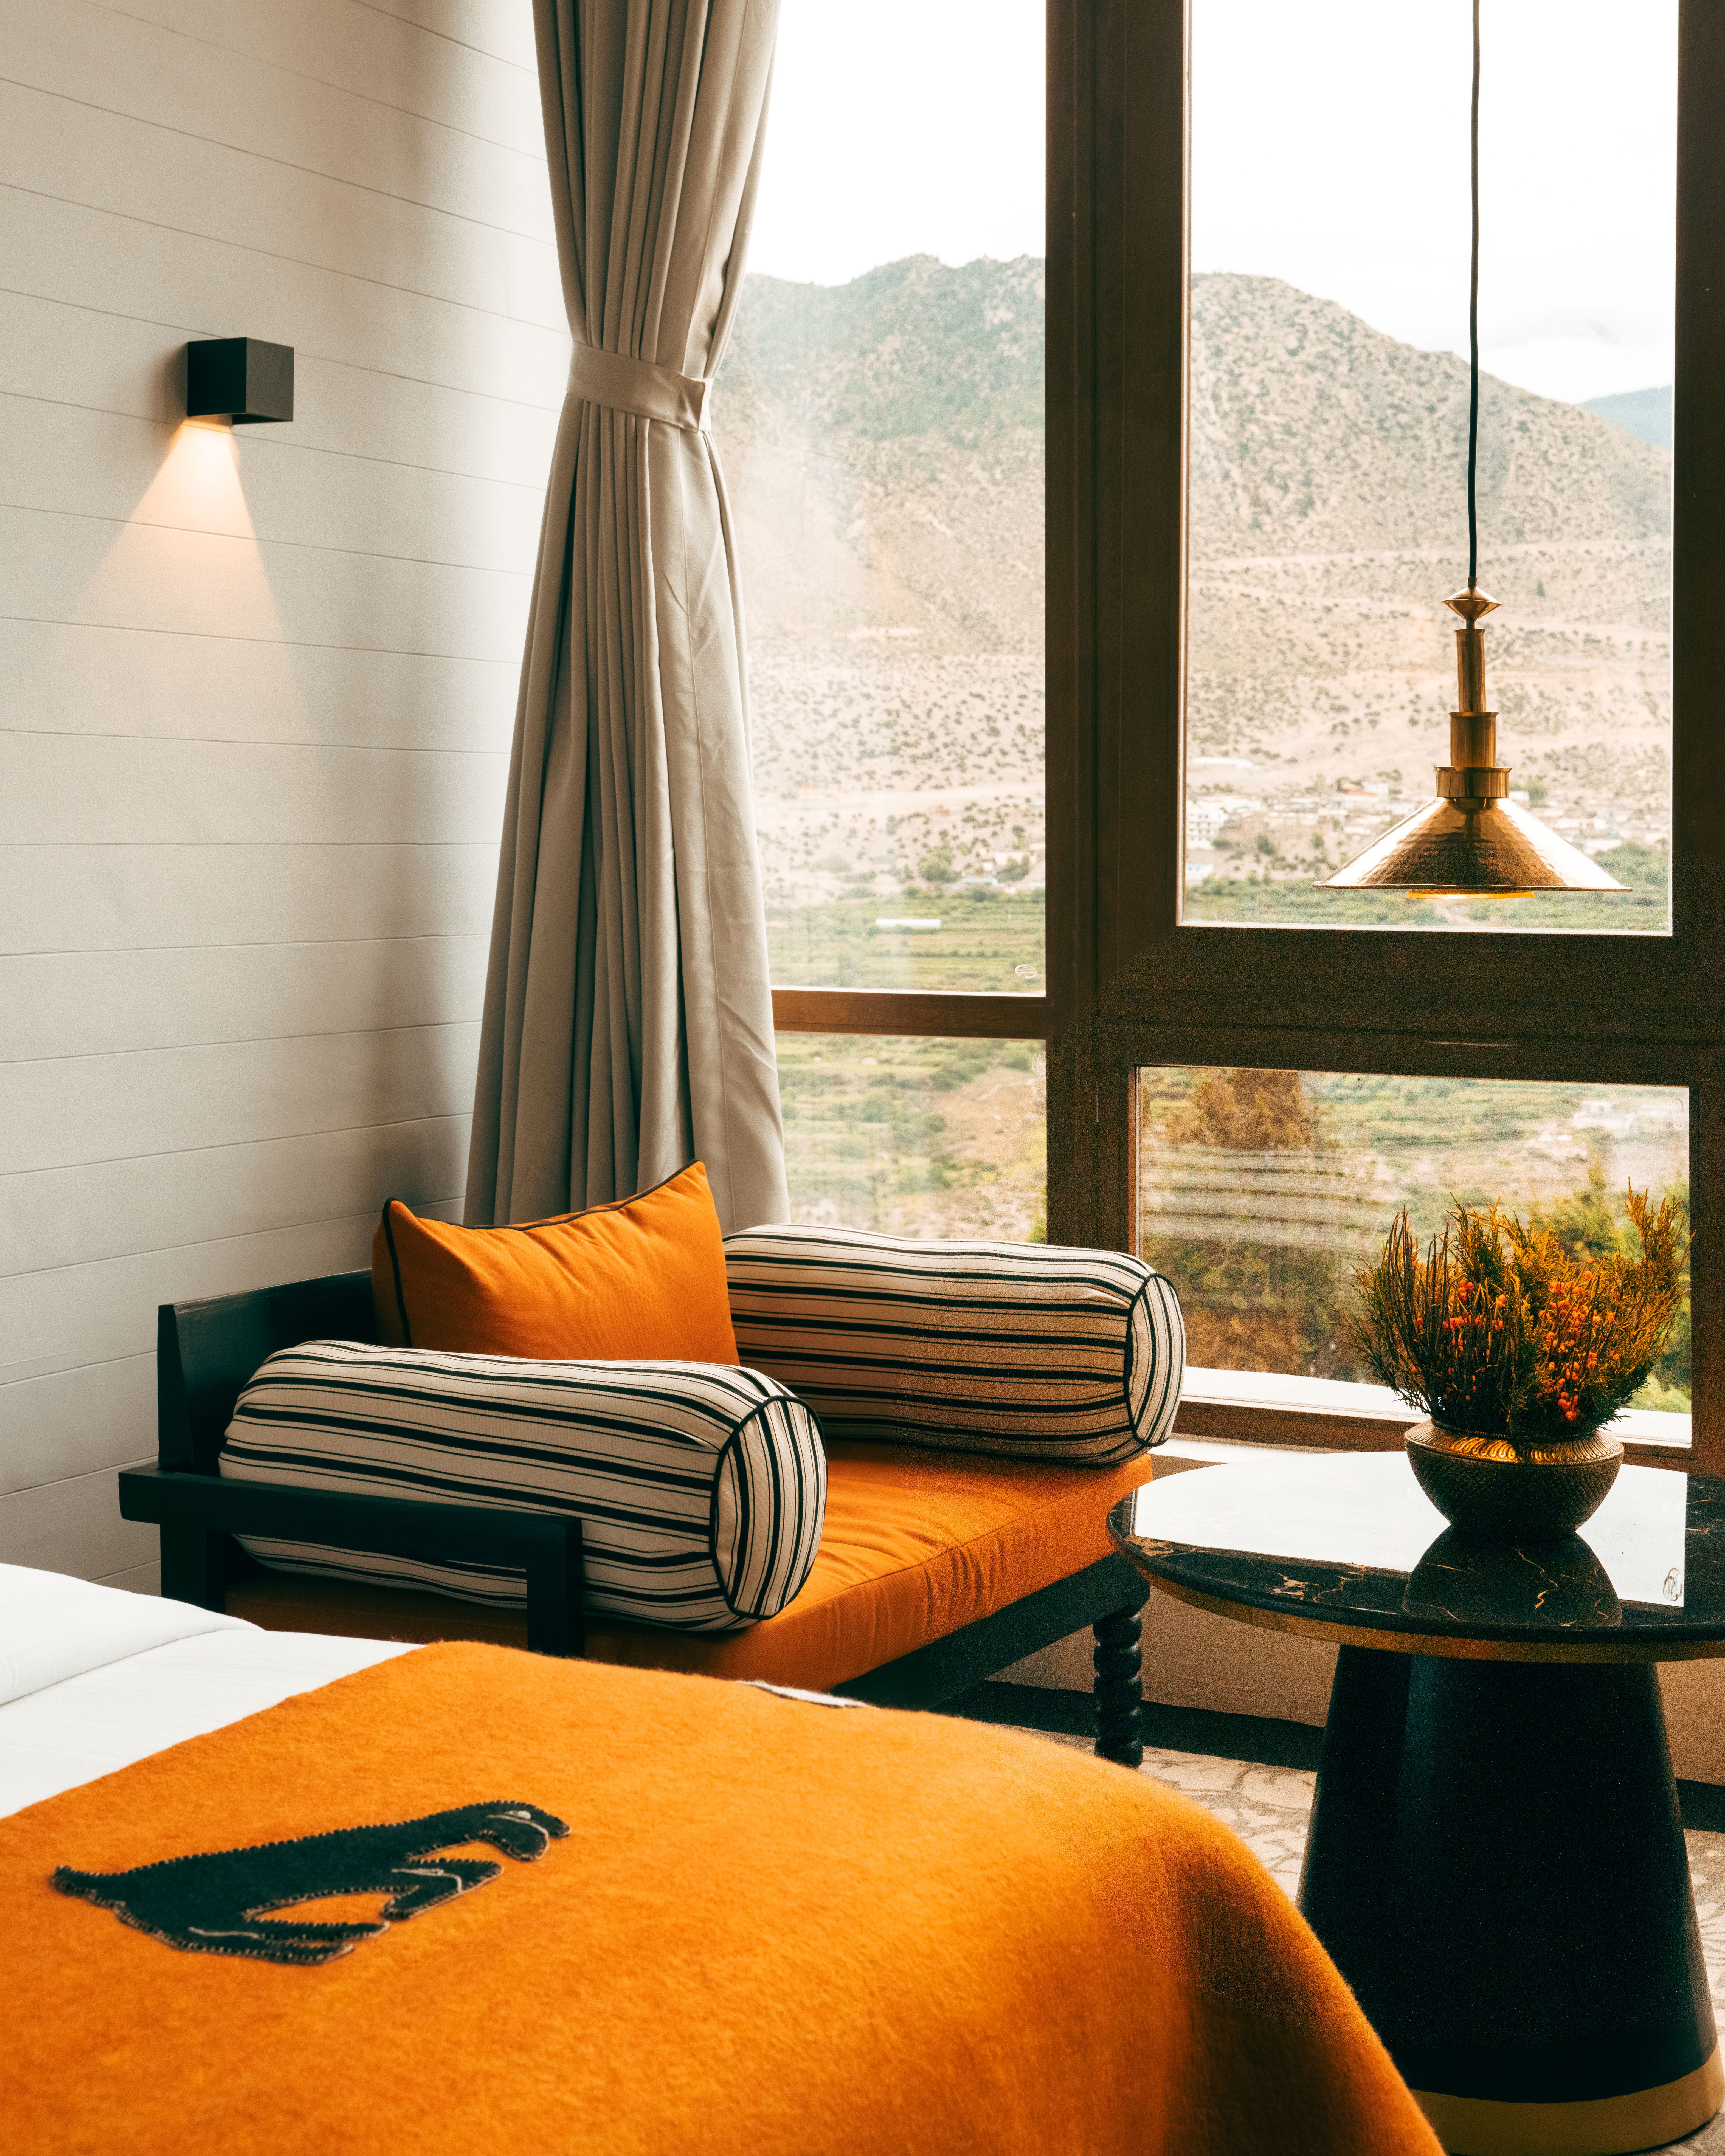 Shinta Mani Mustang bedroom with orange bed cover and upholstery